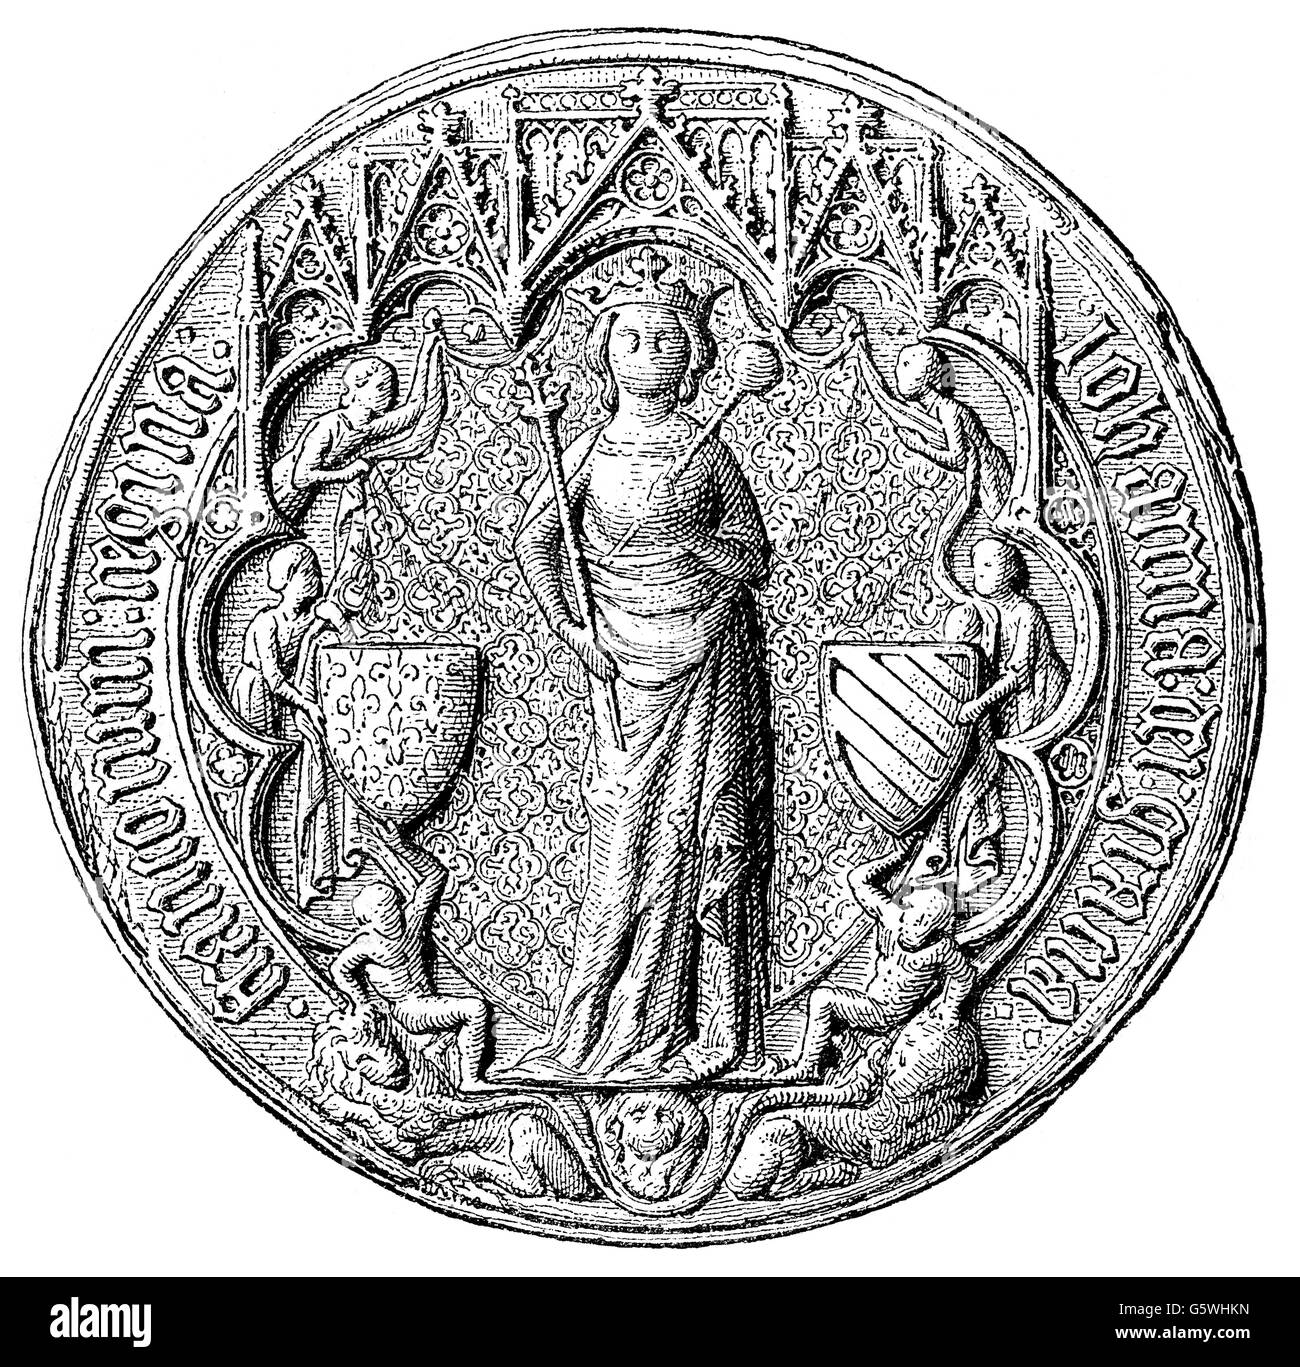 Joan I, 14.1.1273 - 2.4.1305, Queen of Navarre 22.7.1274 - 2.4.1305, Queen of France 5.10.1285 - 2.4.1305, full length, seal, wood engraving, 19th century, Stock Photo